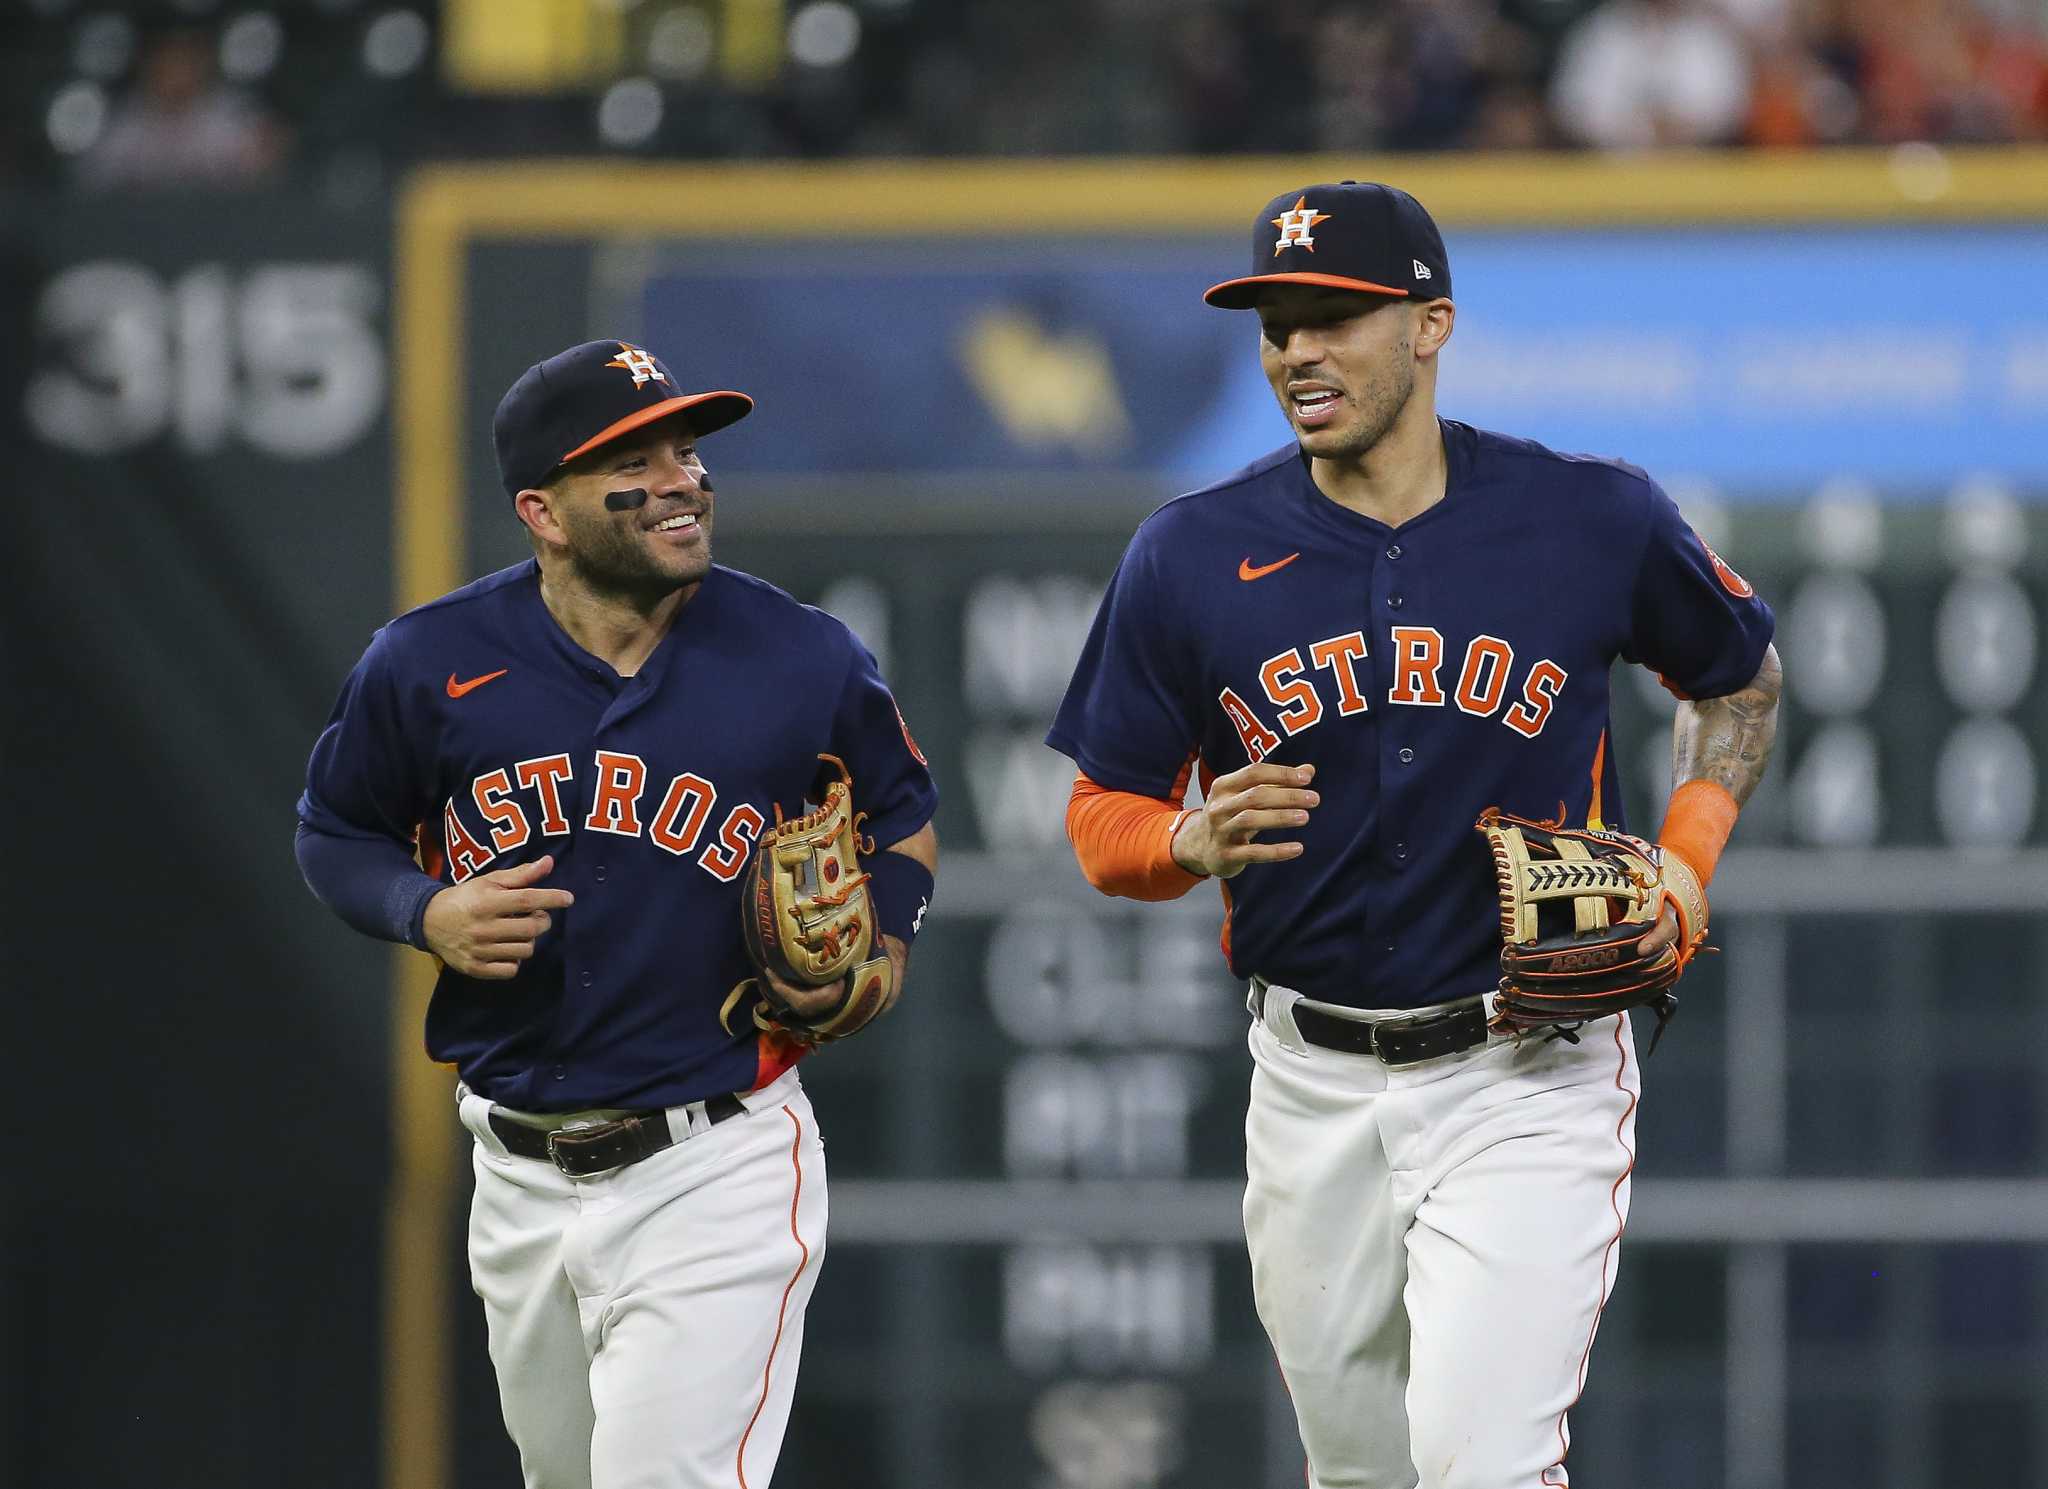 No players from first-place Astros named starter in All-Star Game